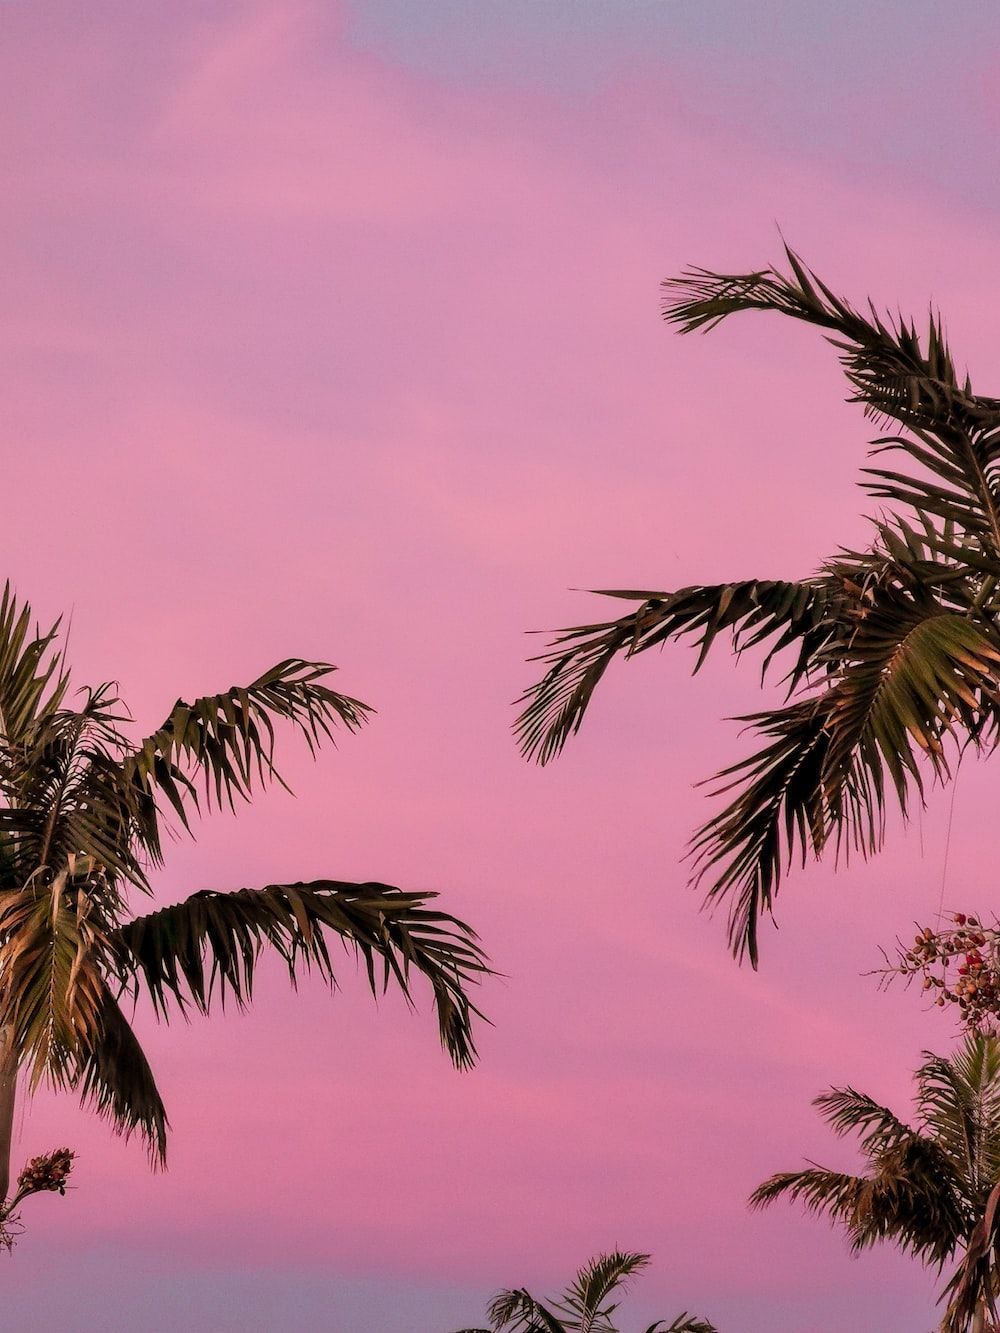 A palm tree is in the foreground of an orange sky - Neon pink, pink collage, beautiful, pink, pink phone, palm tree, HD, light pink, profile picture, Miami, warm, cute pink, Florida, pastel pink, soft pink, photography, bright, pretty, hot pink